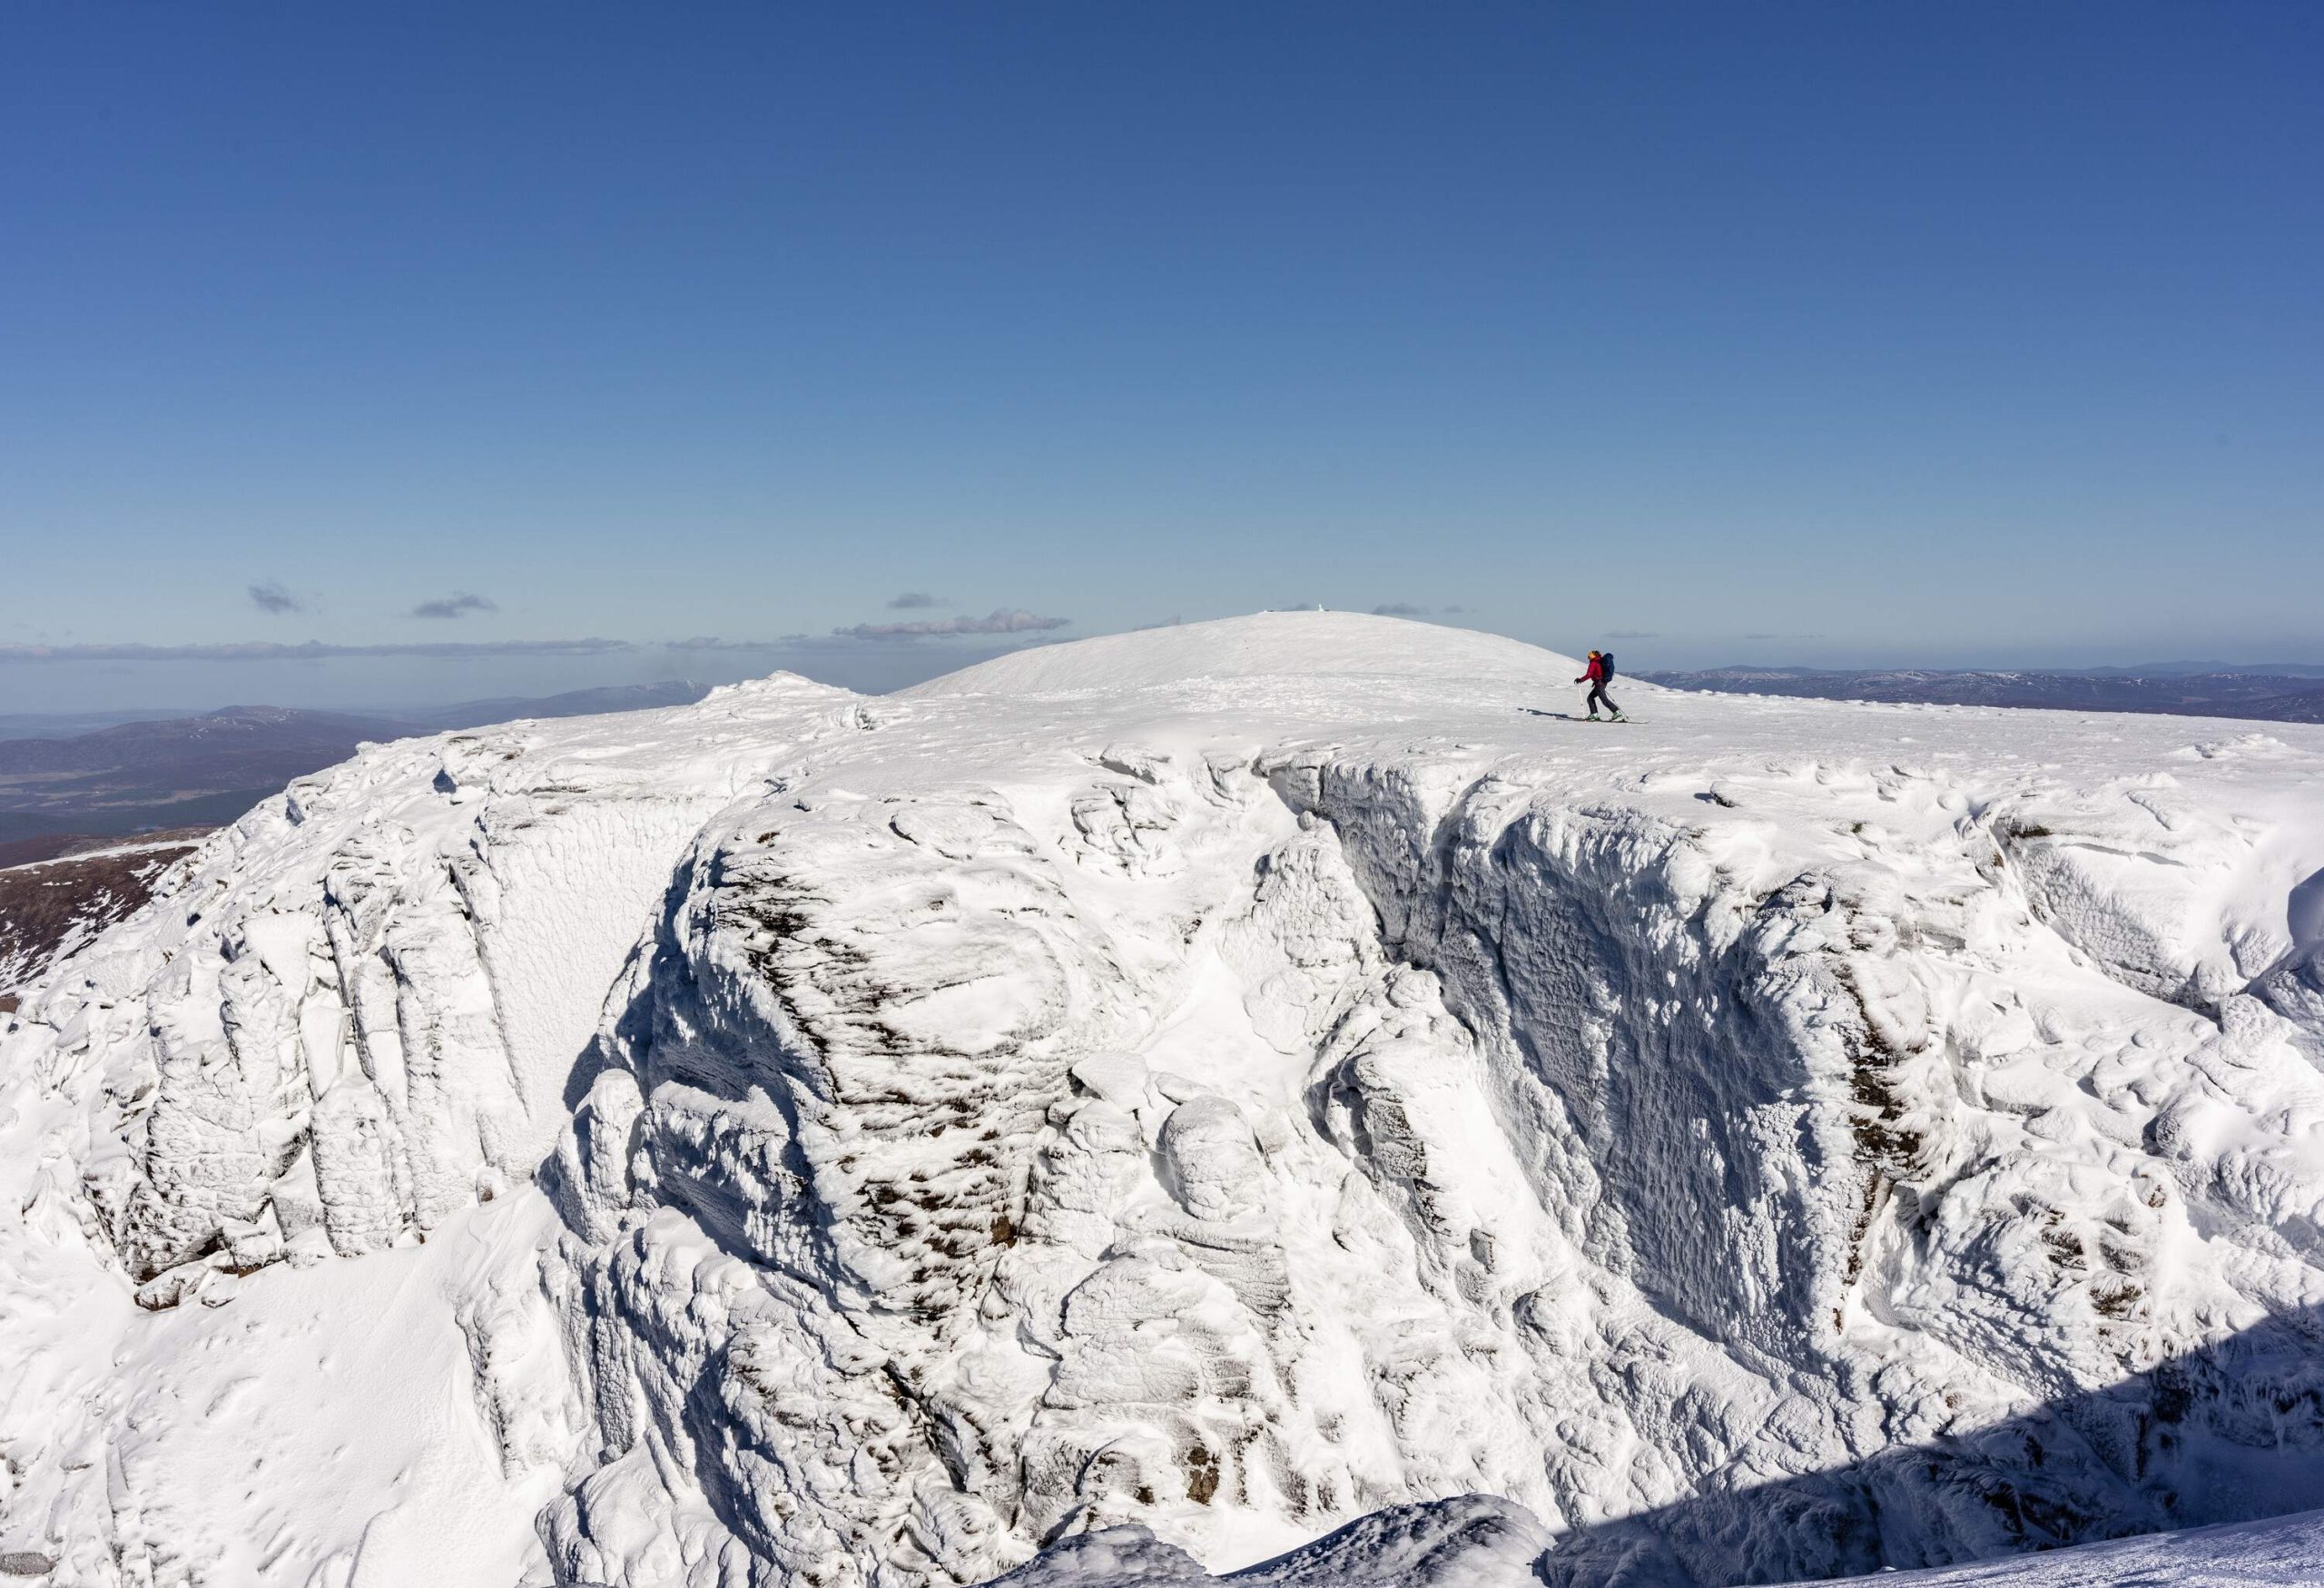 Panoramic view on snow covered mountains and skier on a sunny day, Scotland UK